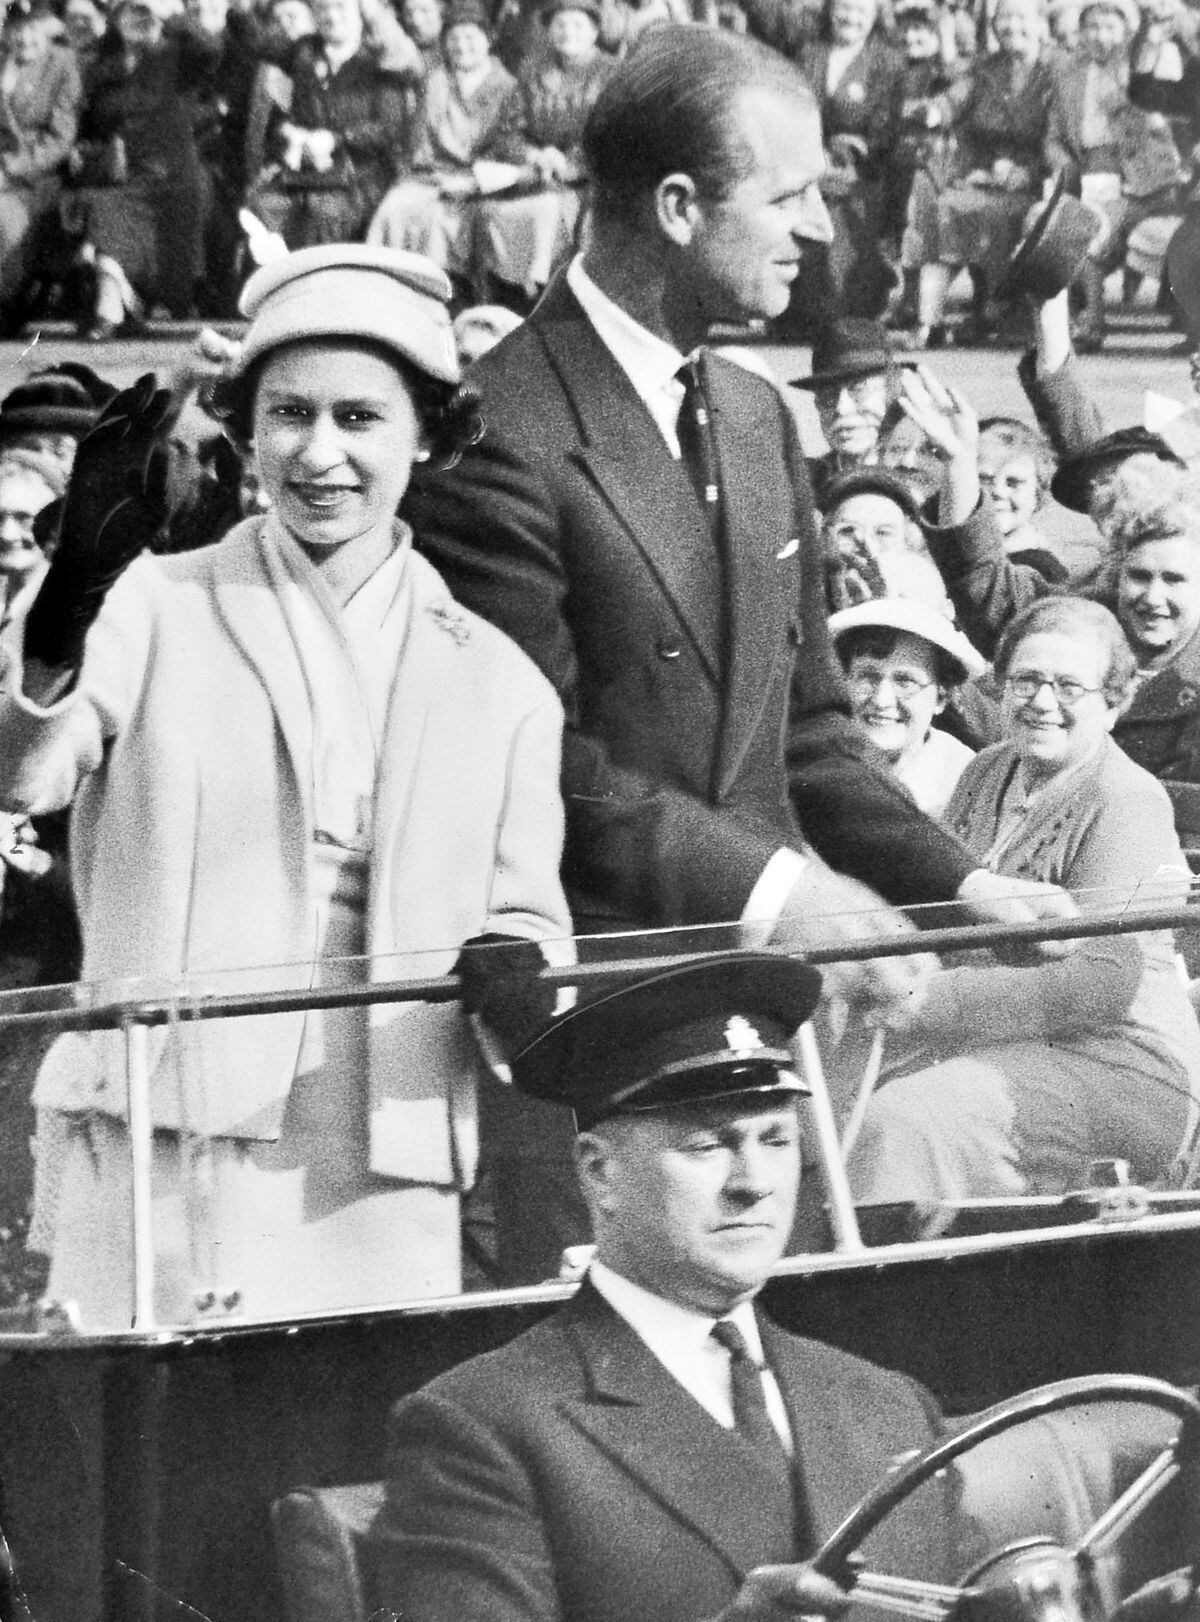 The Queen and Prince Philip at Mary Stevens Park in Stourbridge on April 23, 1957. 